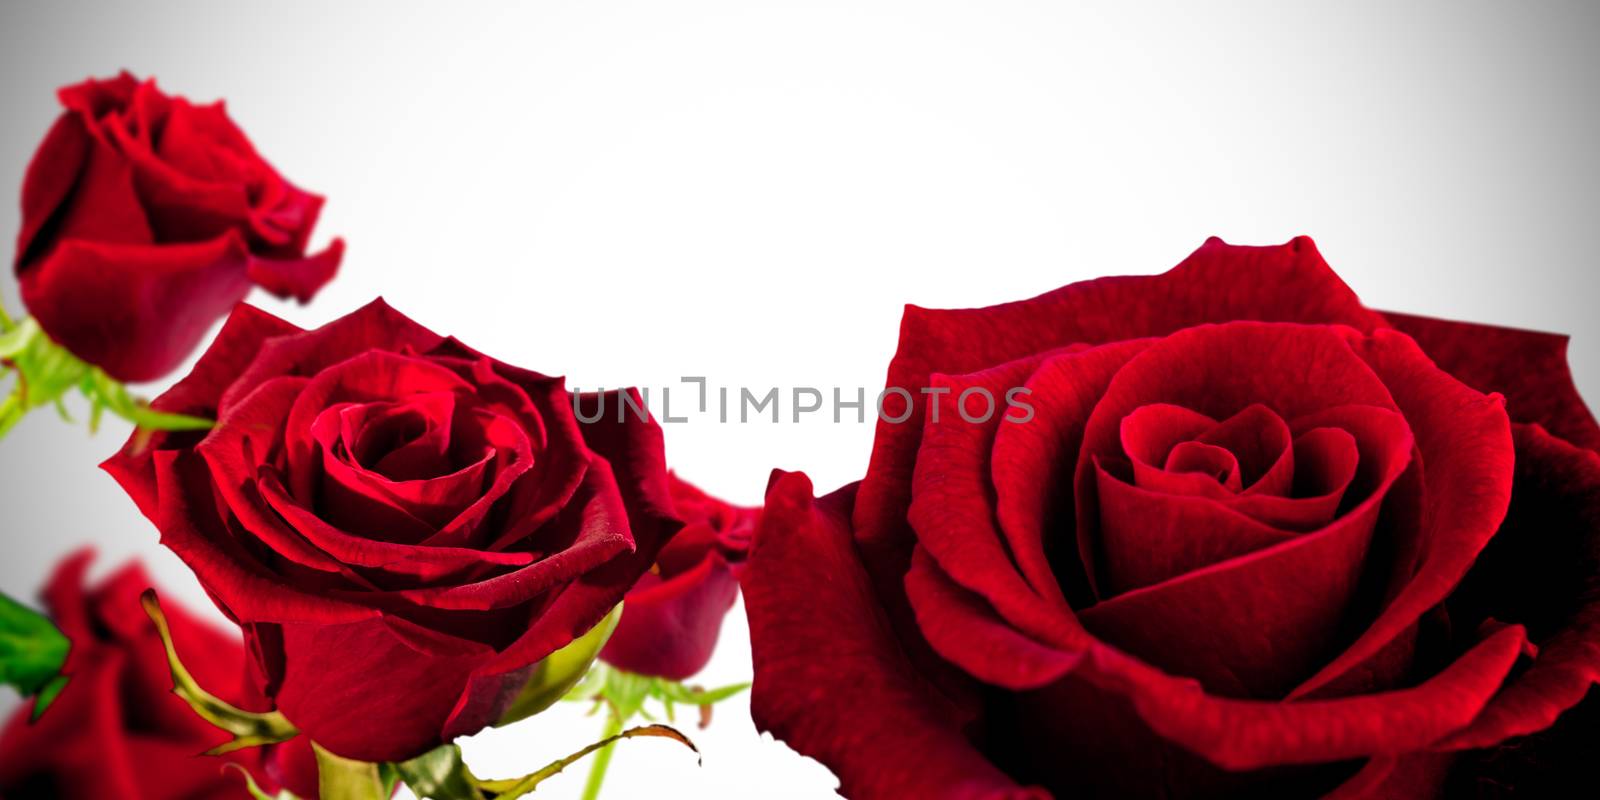 Red roses against white background with vignette